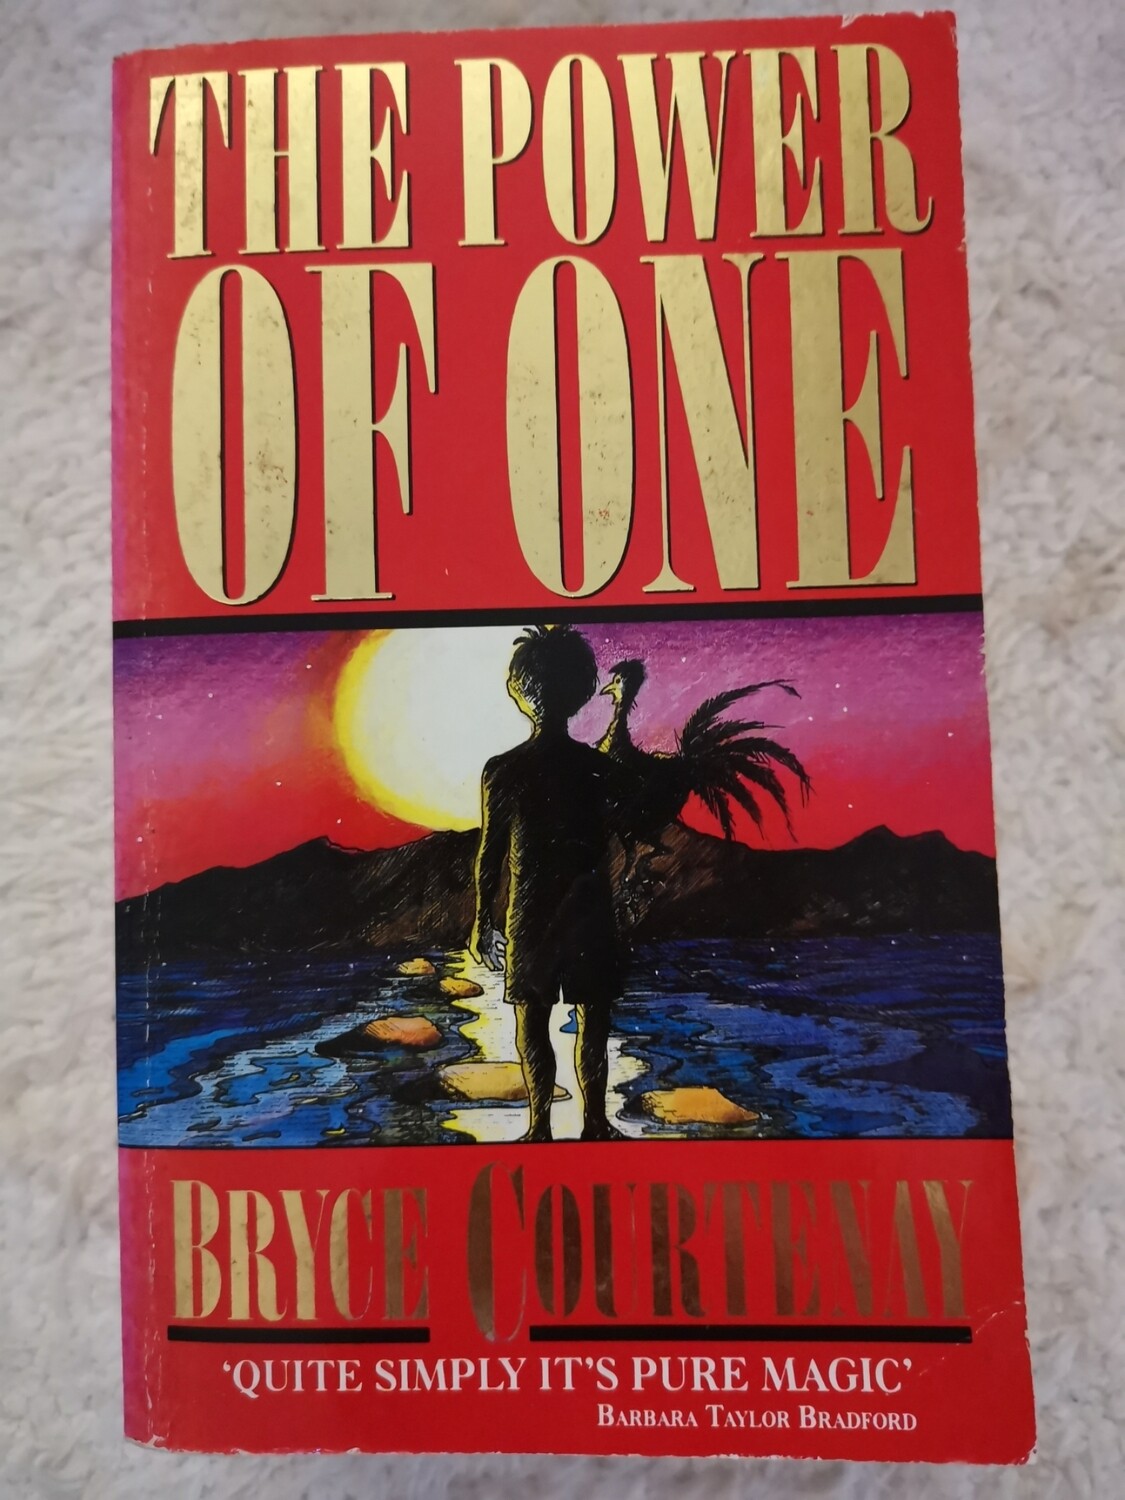 The power of one, Bryce Courenay